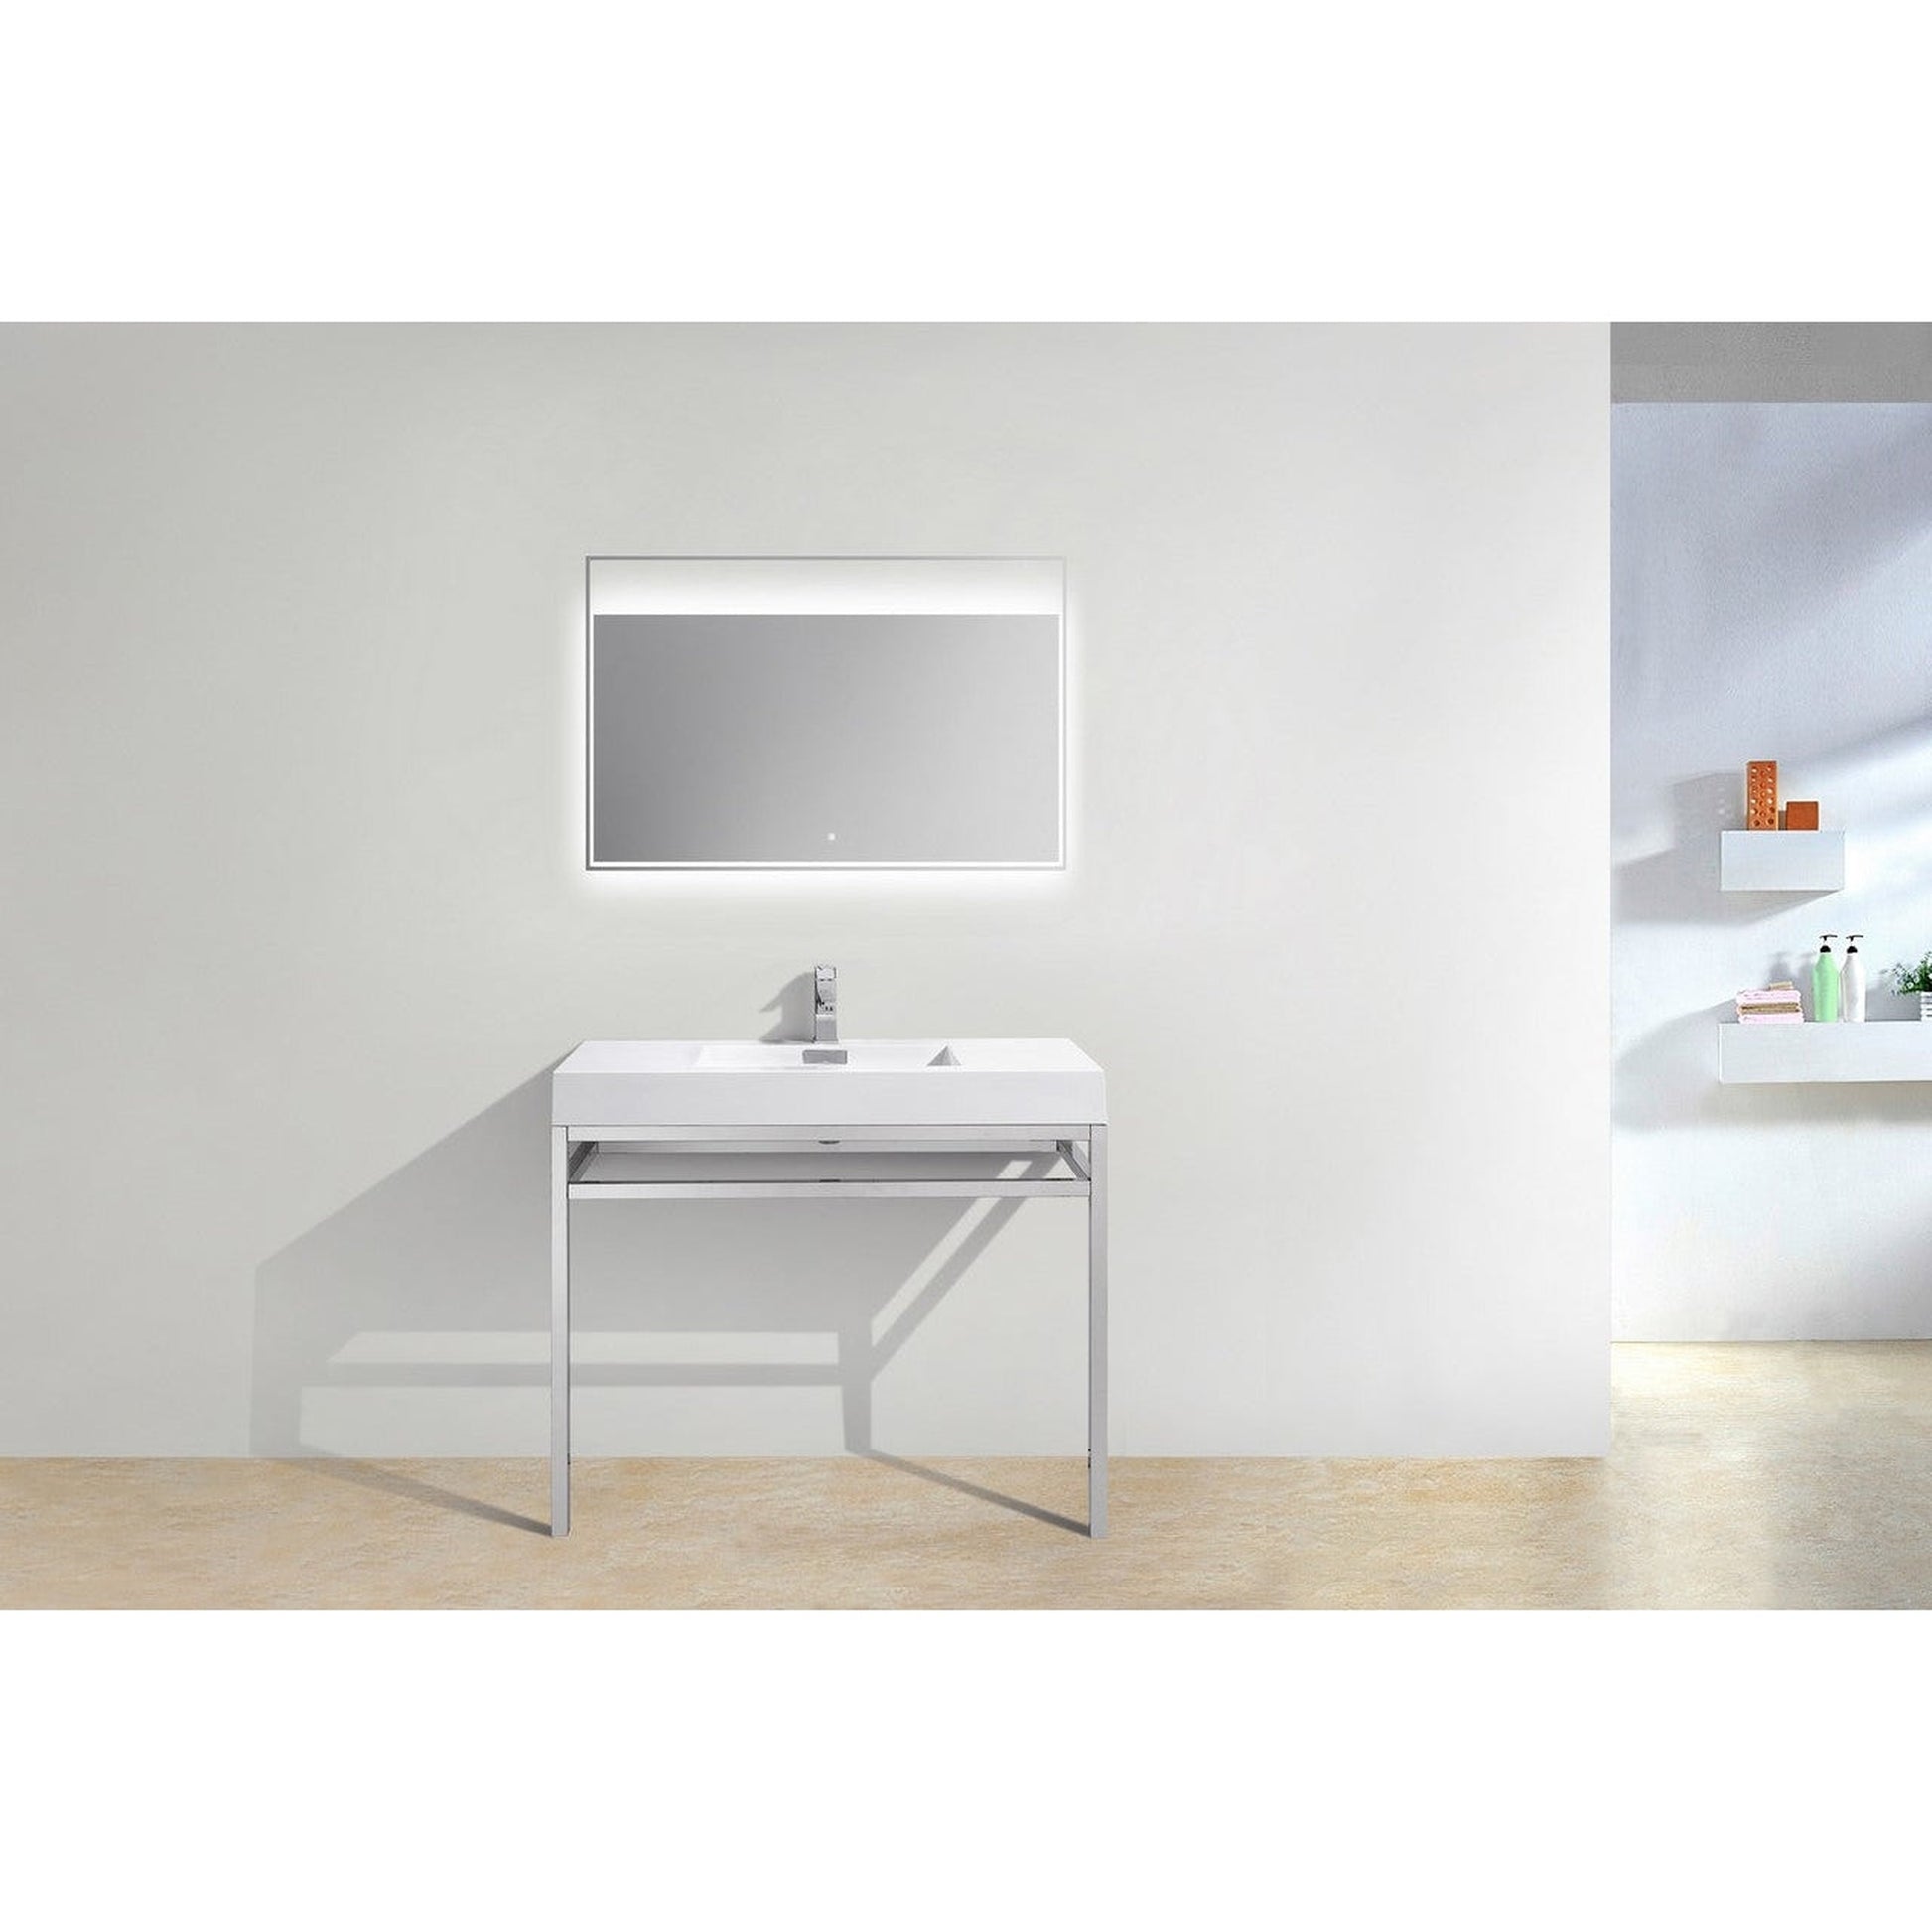 KubeBath Haus 40" White Acrylic Sink With Chrome Finish Stainless Steel Console